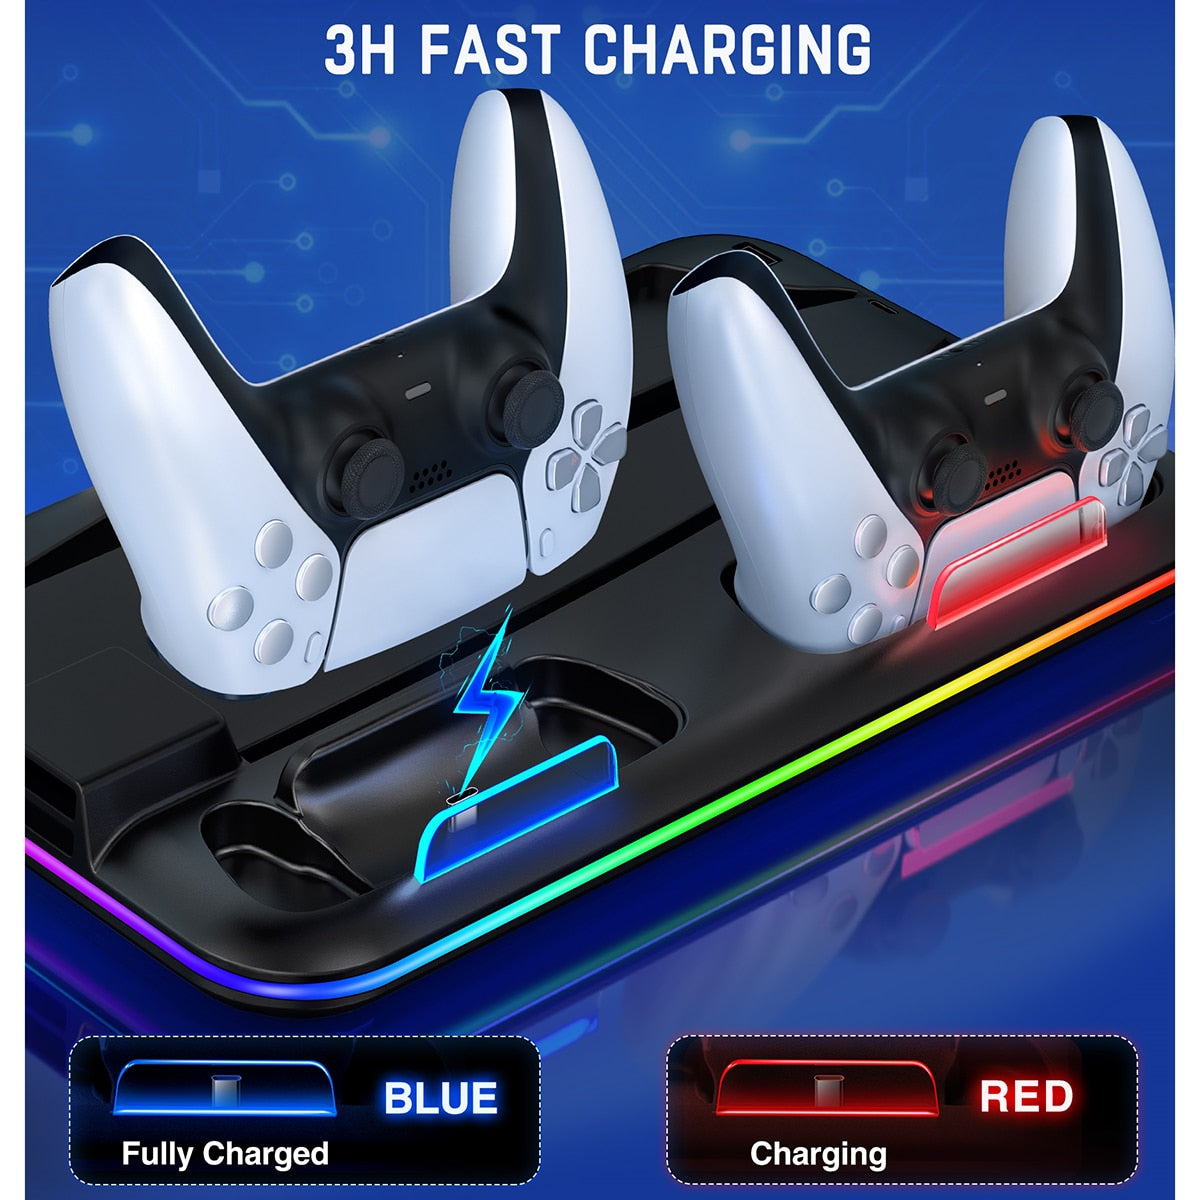 PS5 Charging/Cooling Station